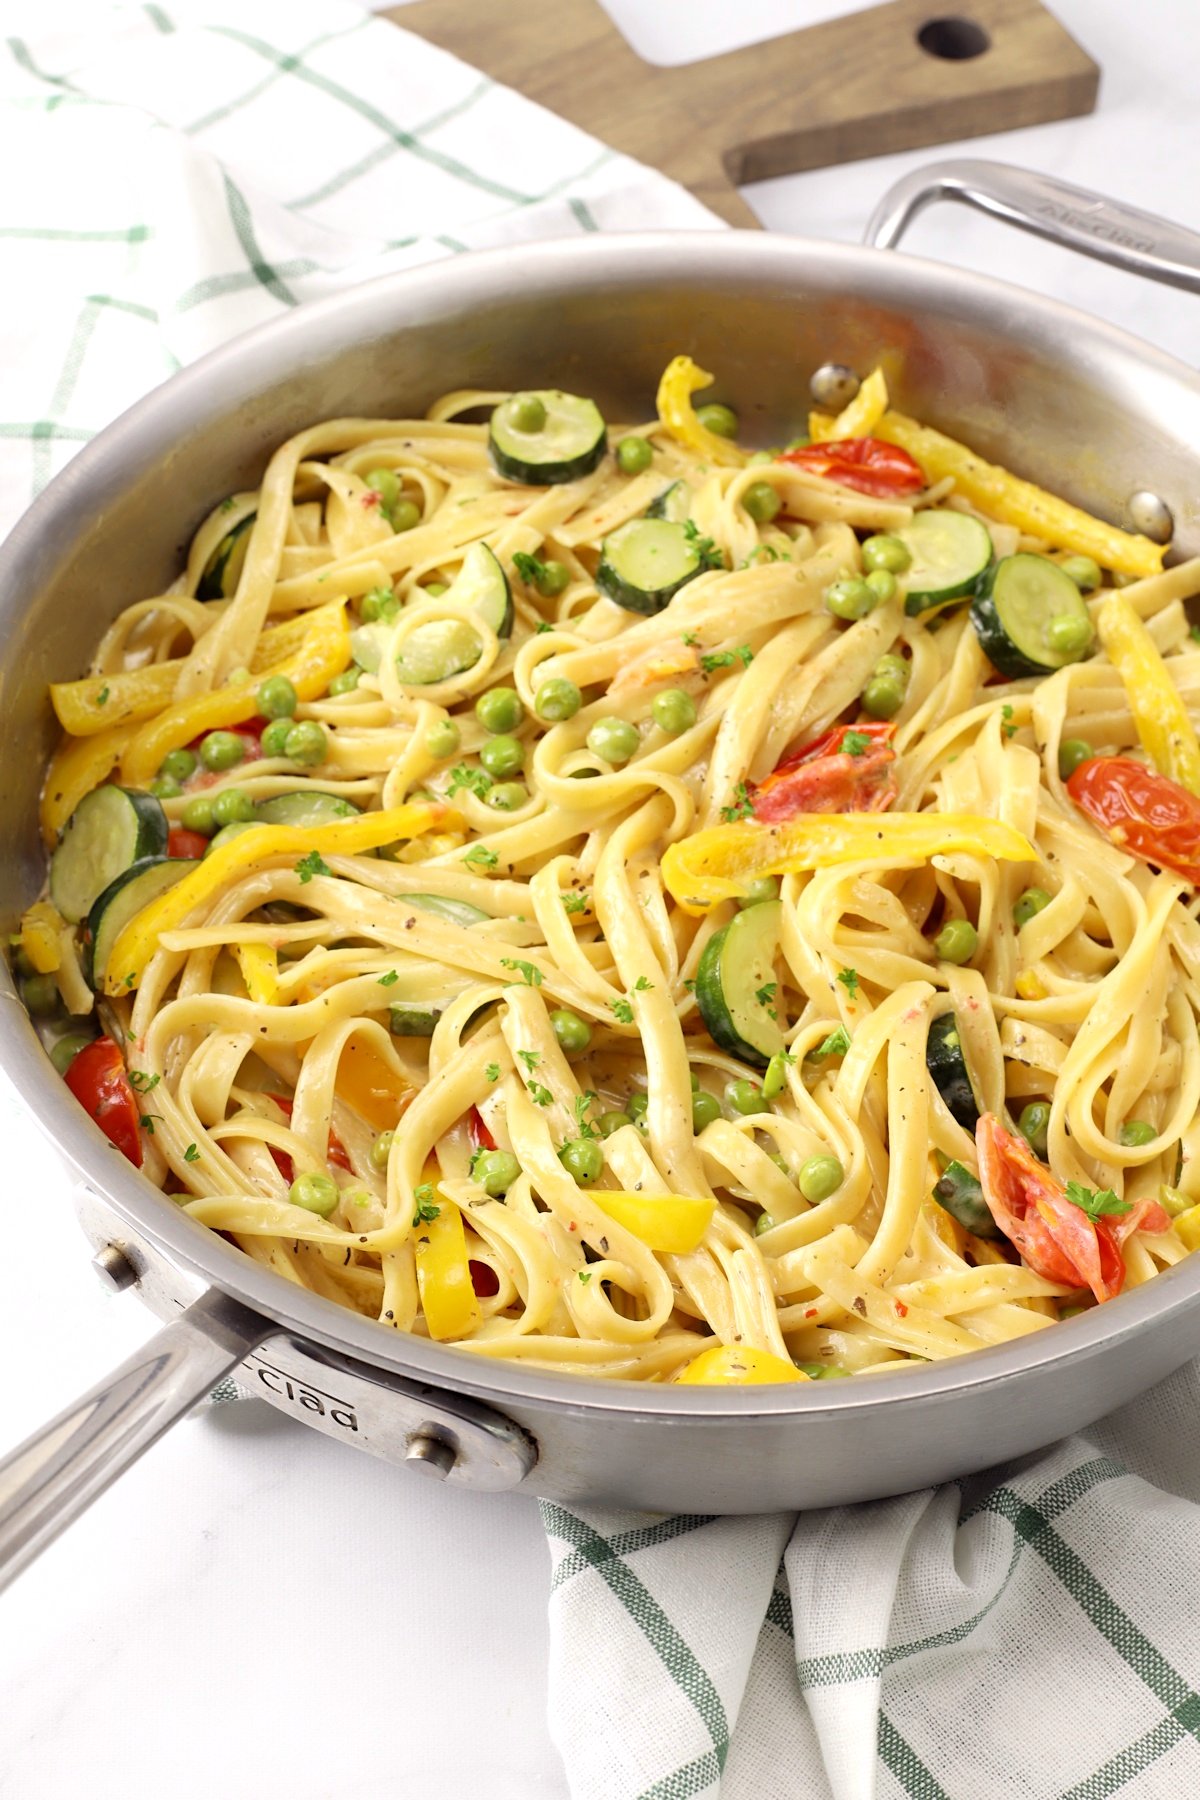 A saute pan filled with creamy pasta primavera with bright summer vegetables.